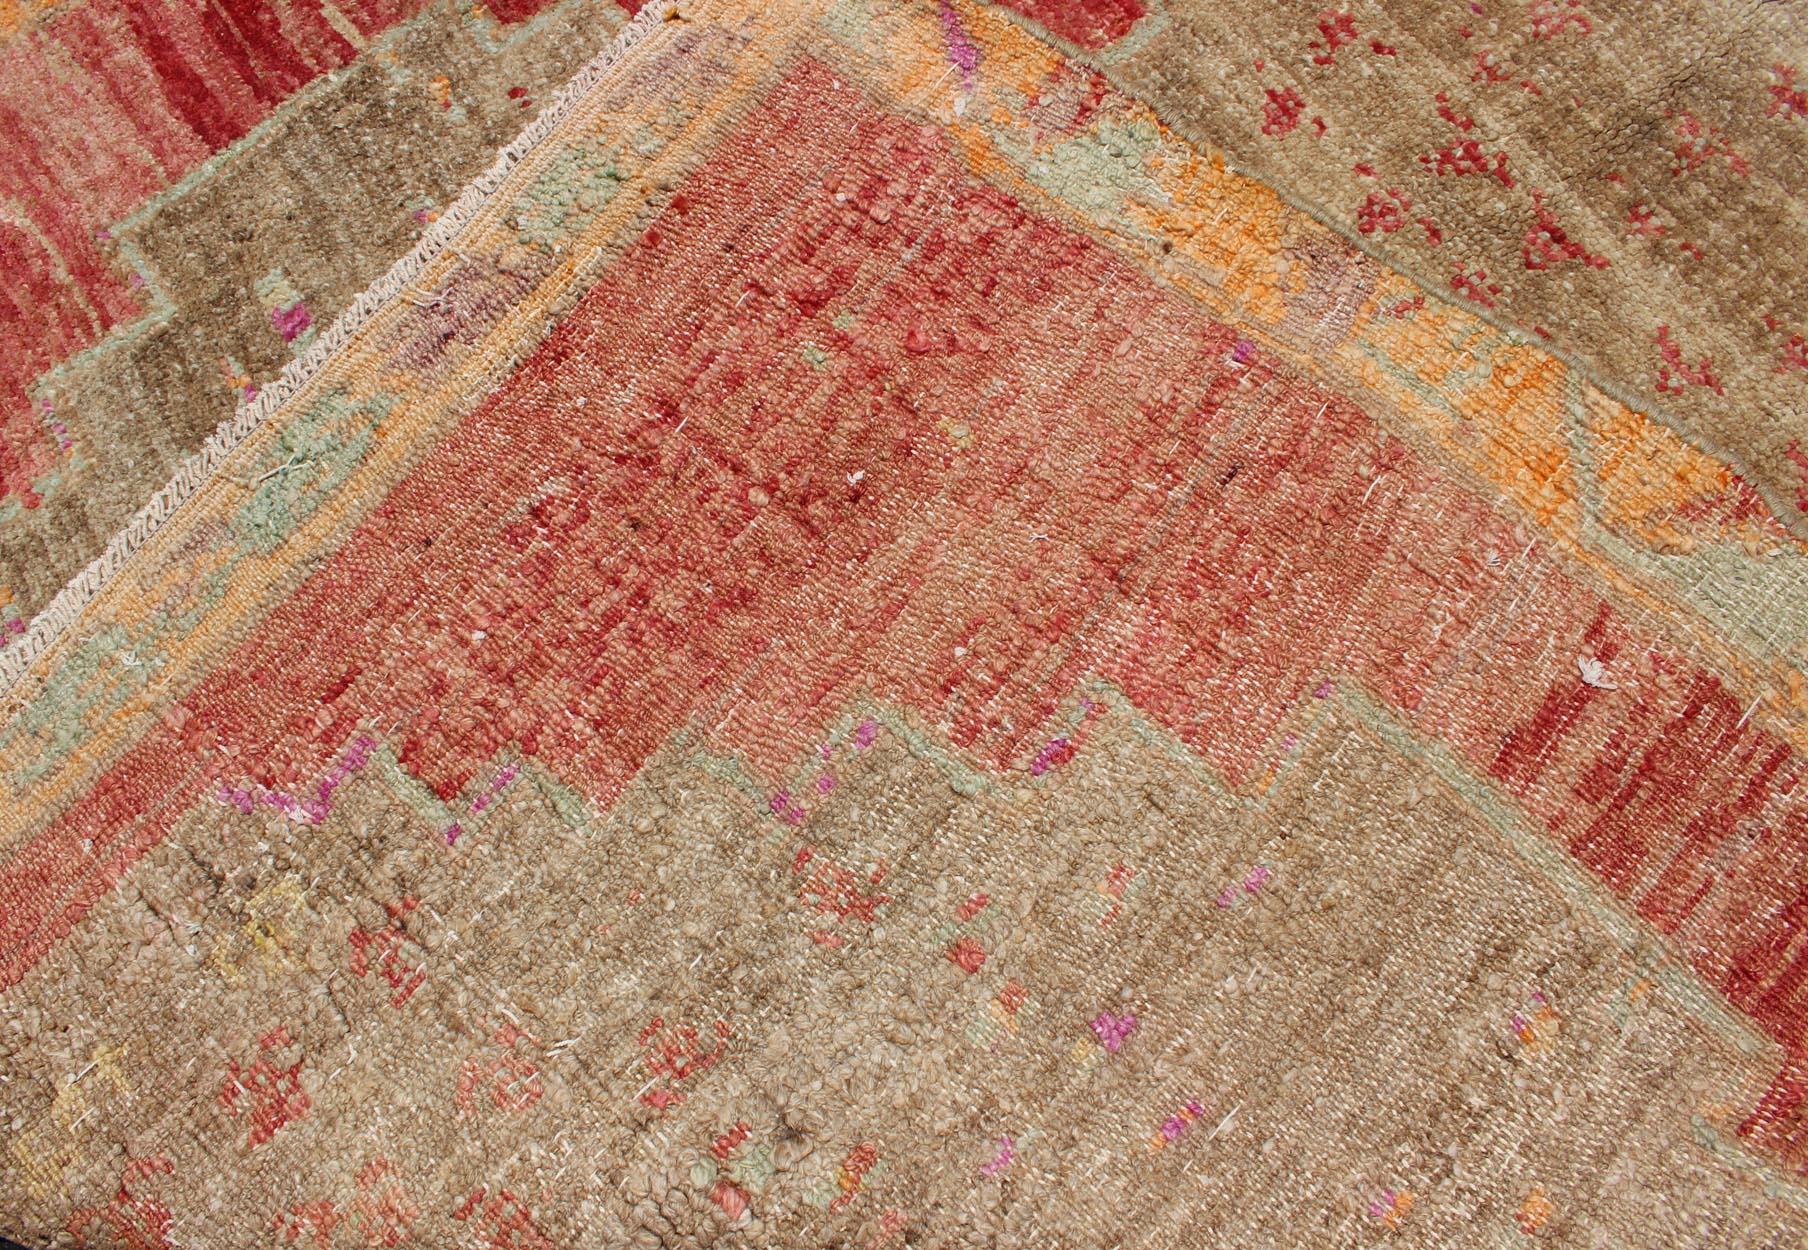 Vibrant Turkish Vintage Runner in Faded Red, Coral, Orange, Pink and Green For Sale 4